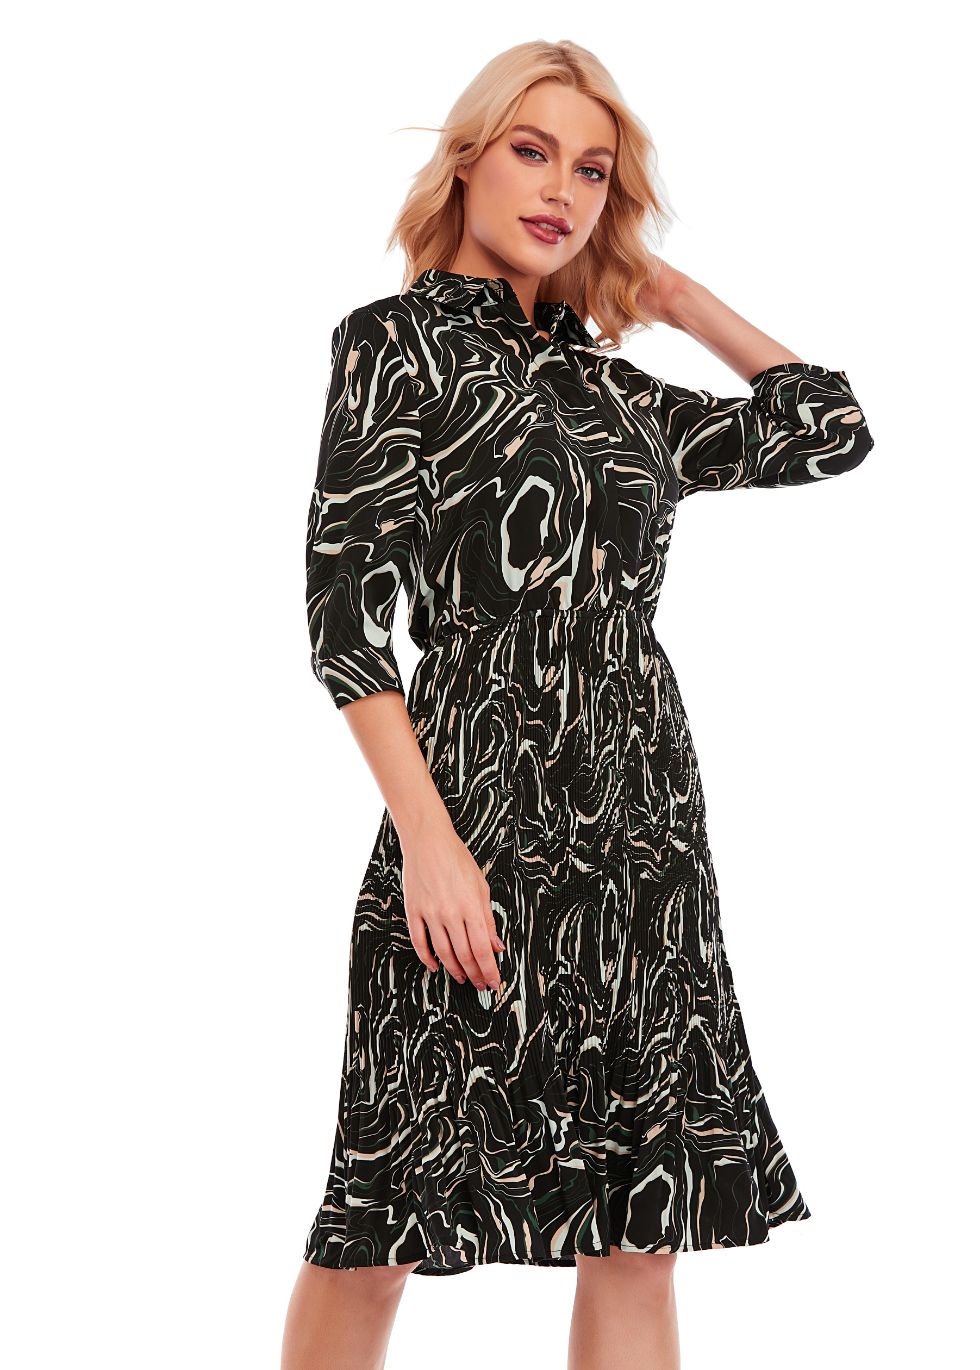 Micro Pleated Skirt Print Dress with 3/4 Sleeve and Button Down Top - alamaud